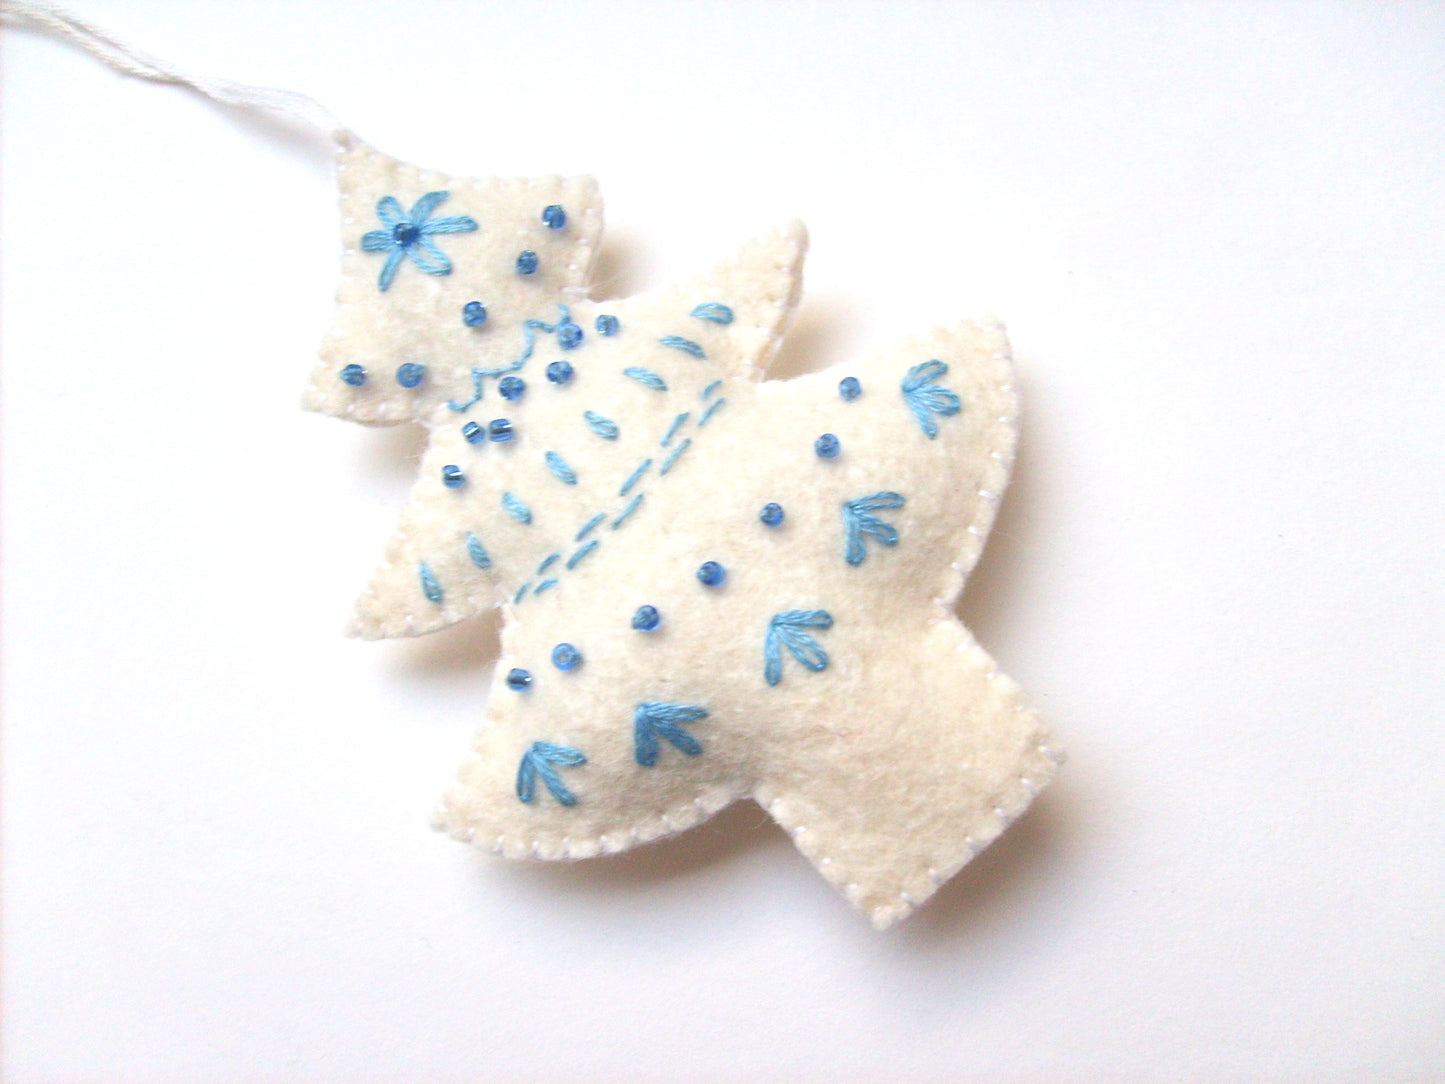 Embroidered Christmas tree ornament - felt hanging decoration